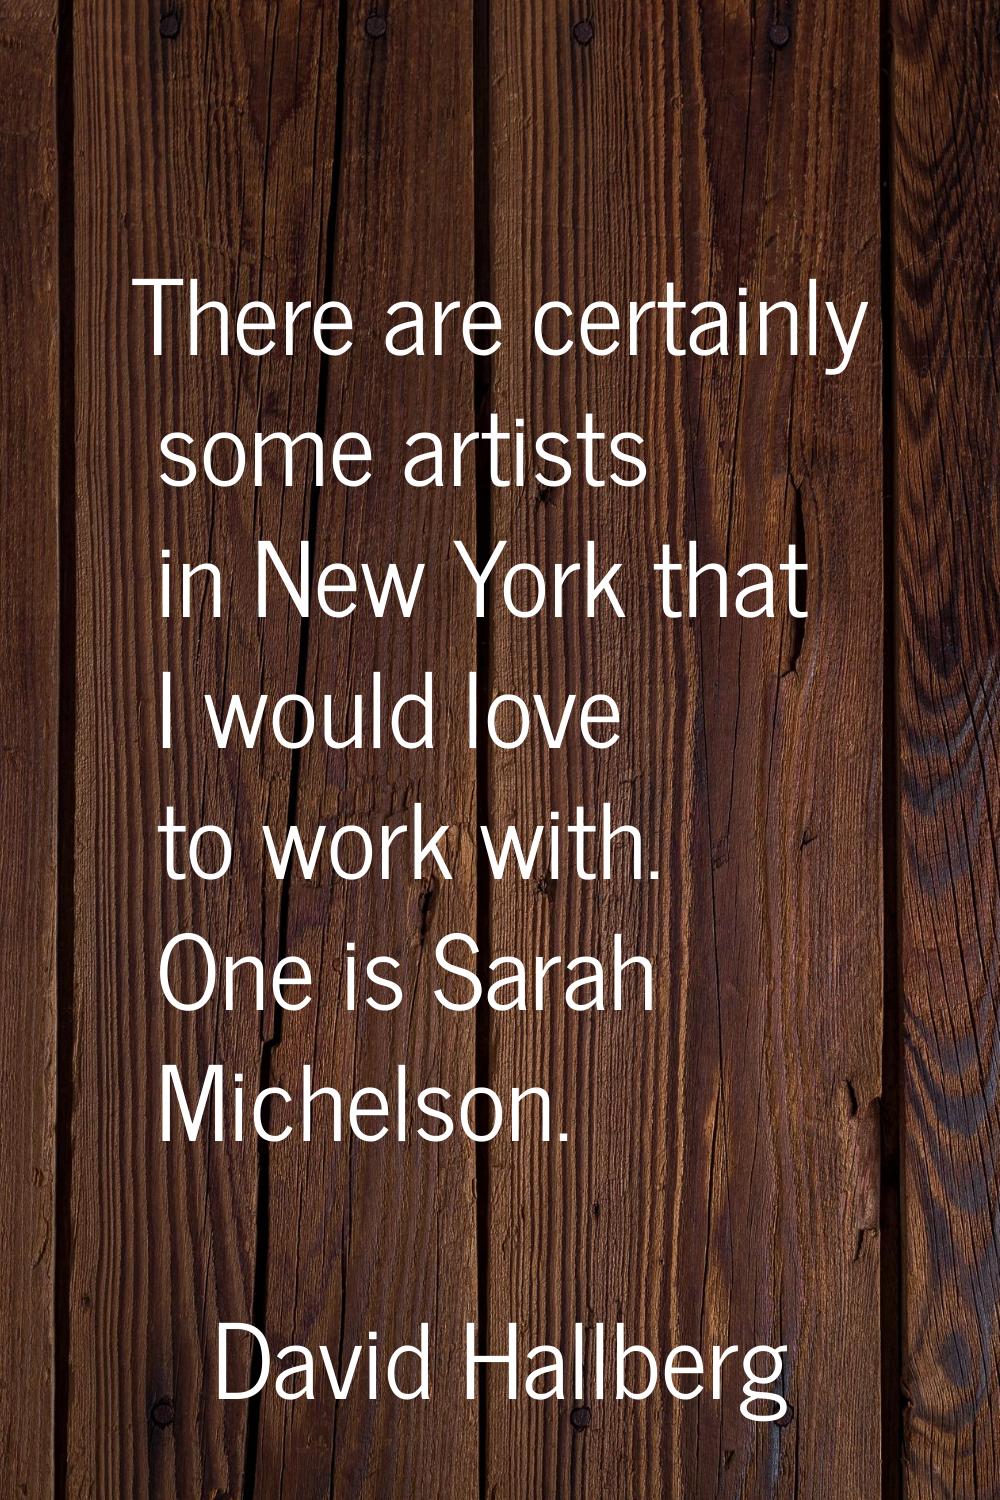 There are certainly some artists in New York that I would love to work with. One is Sarah Michelson